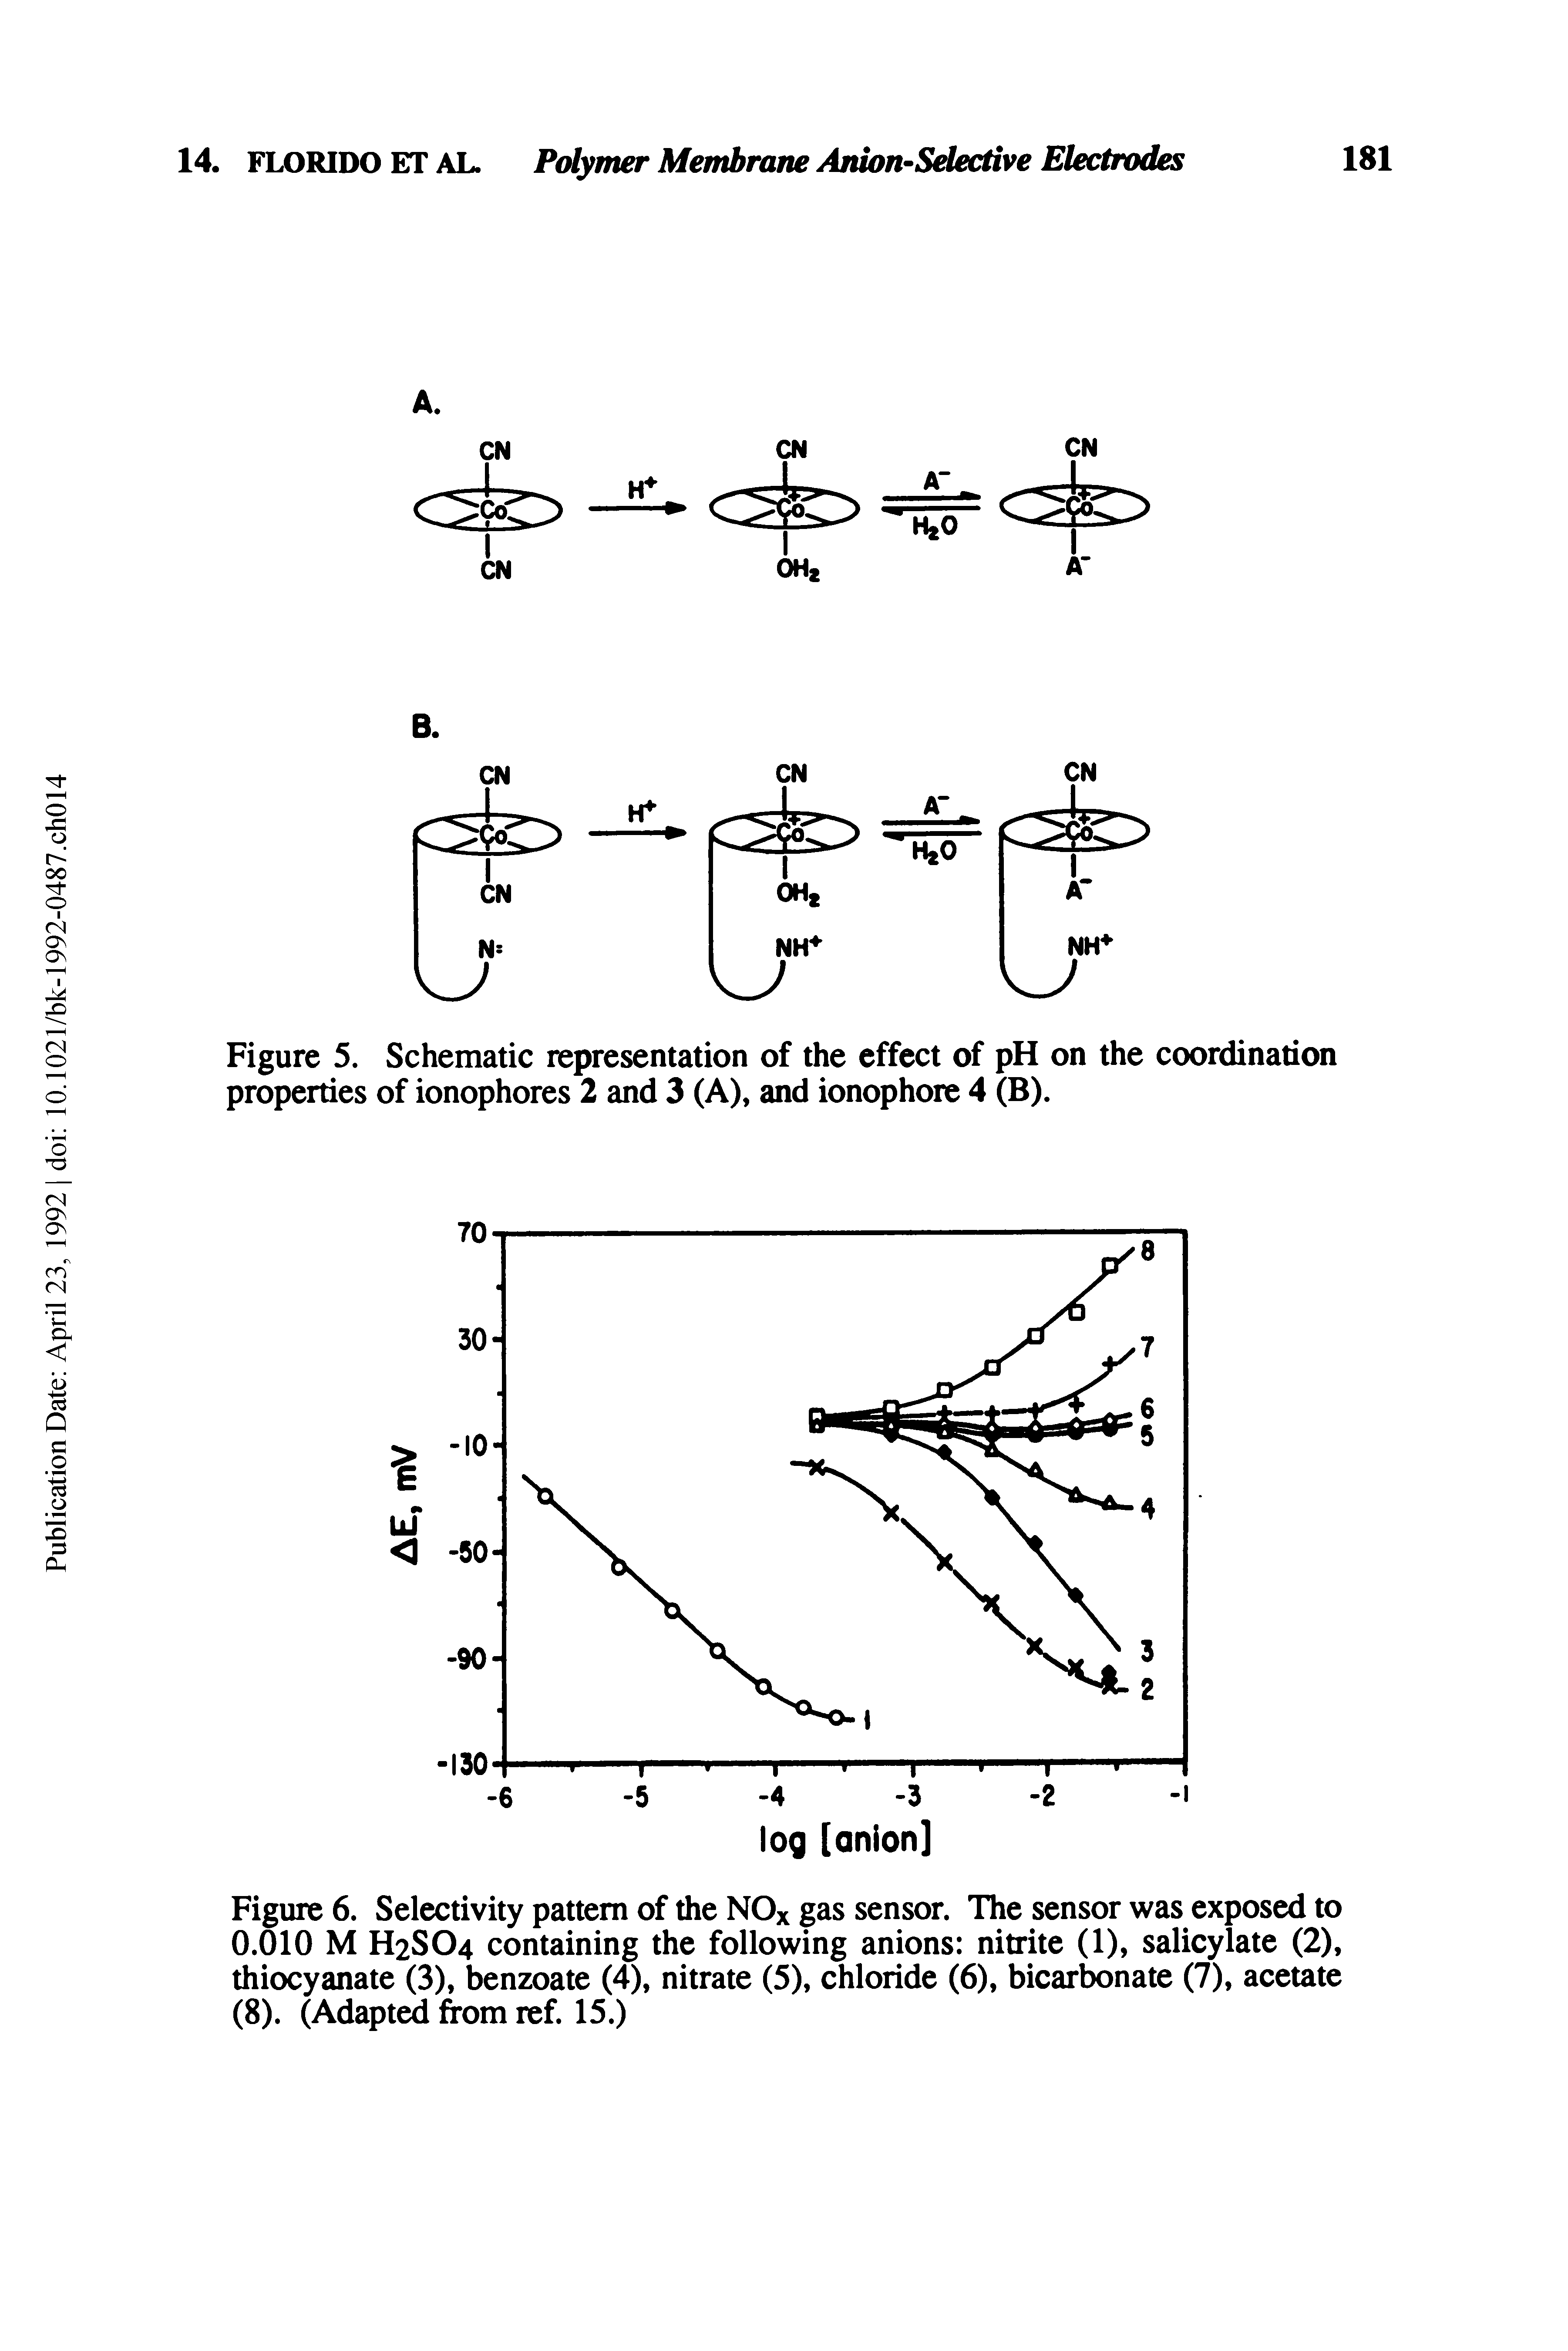 Figure 6. Selectivity pattern of the NOx gas sensor. The sensor was exposed to 0.010 M H2SO4 containing the following anions nitrite (1), salicylate (2), thiocyanate (3), benzoate (4), nitrate (5), chloride (6), bicarbonate (7), acetate (8). (Adapted from ref. 15.)...